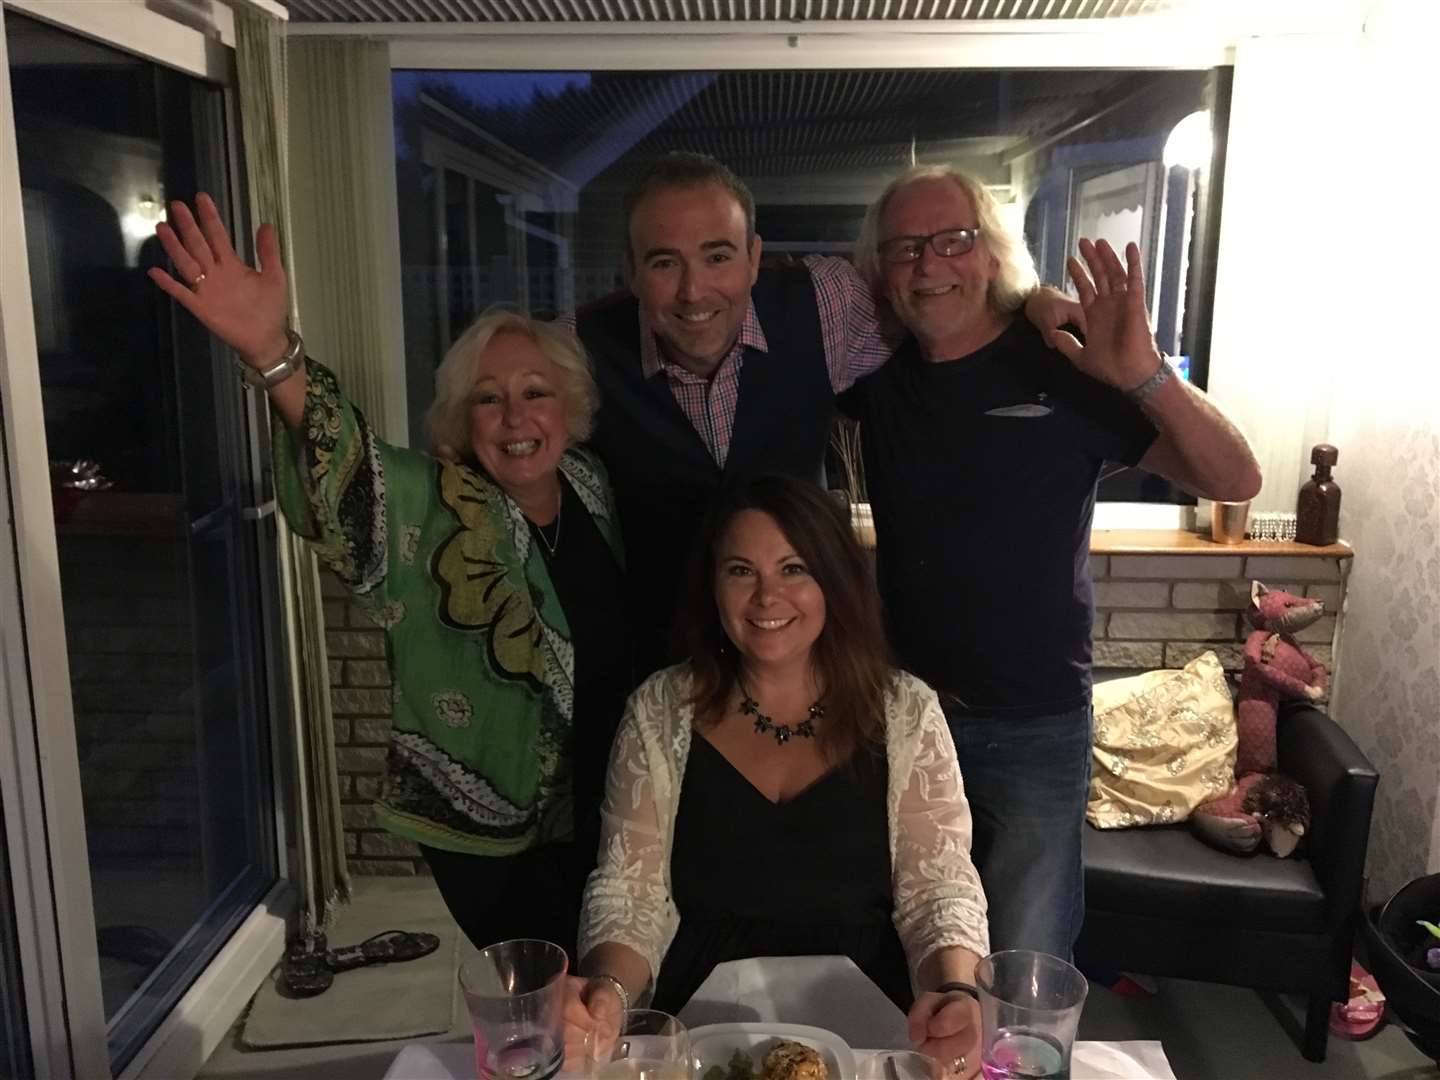 Come Dine With Me couple Jill and Geoff Martin with prize winners Jon & Kellie Mage